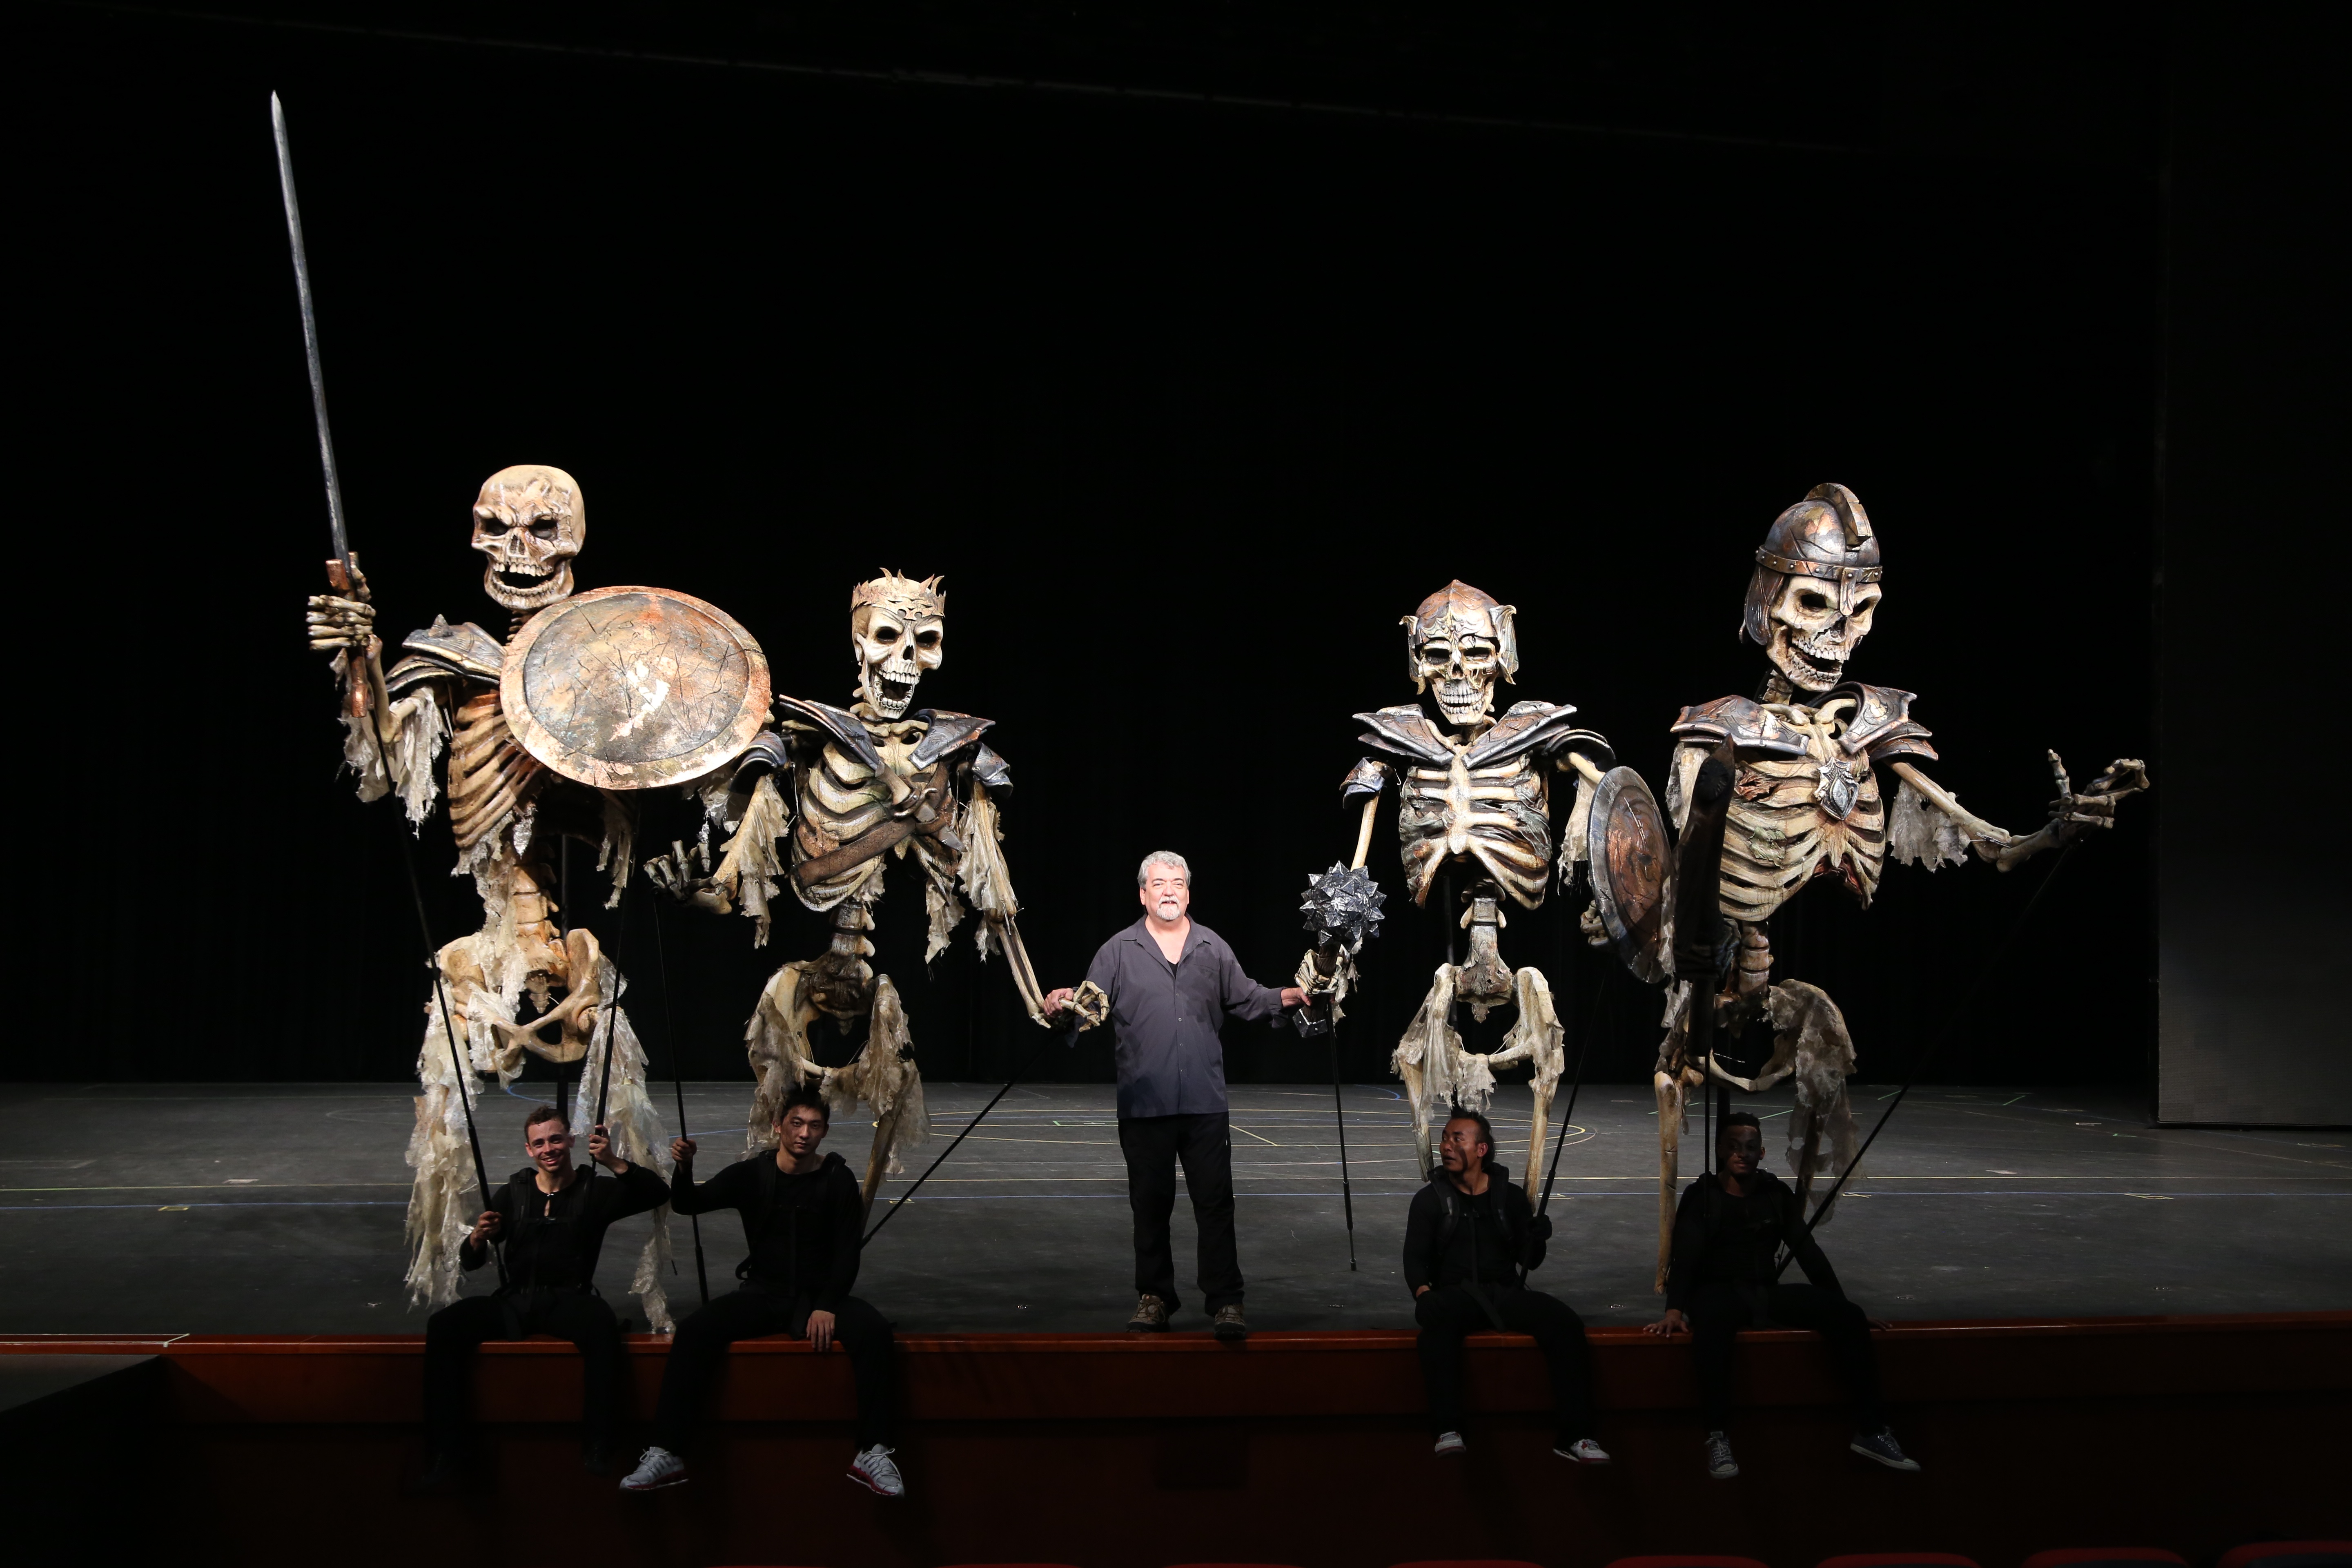 Daniel Flannery & Michael Curry puppets in his ILLUSIONS show, China